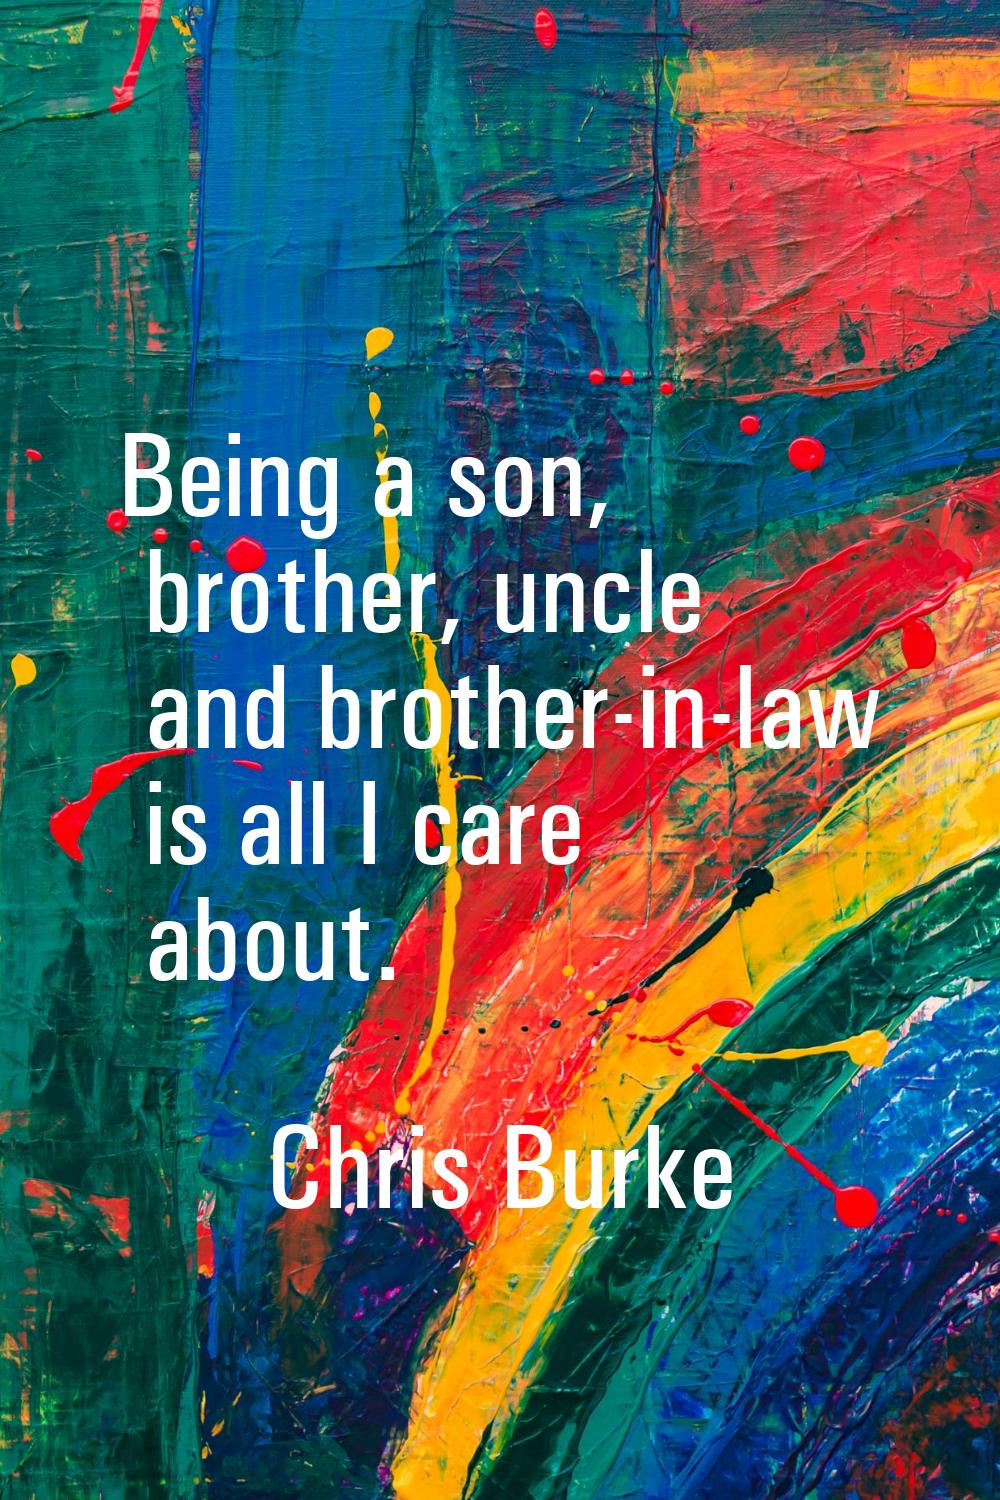 Being a son, brother, uncle and brother-in-law is all I care about.